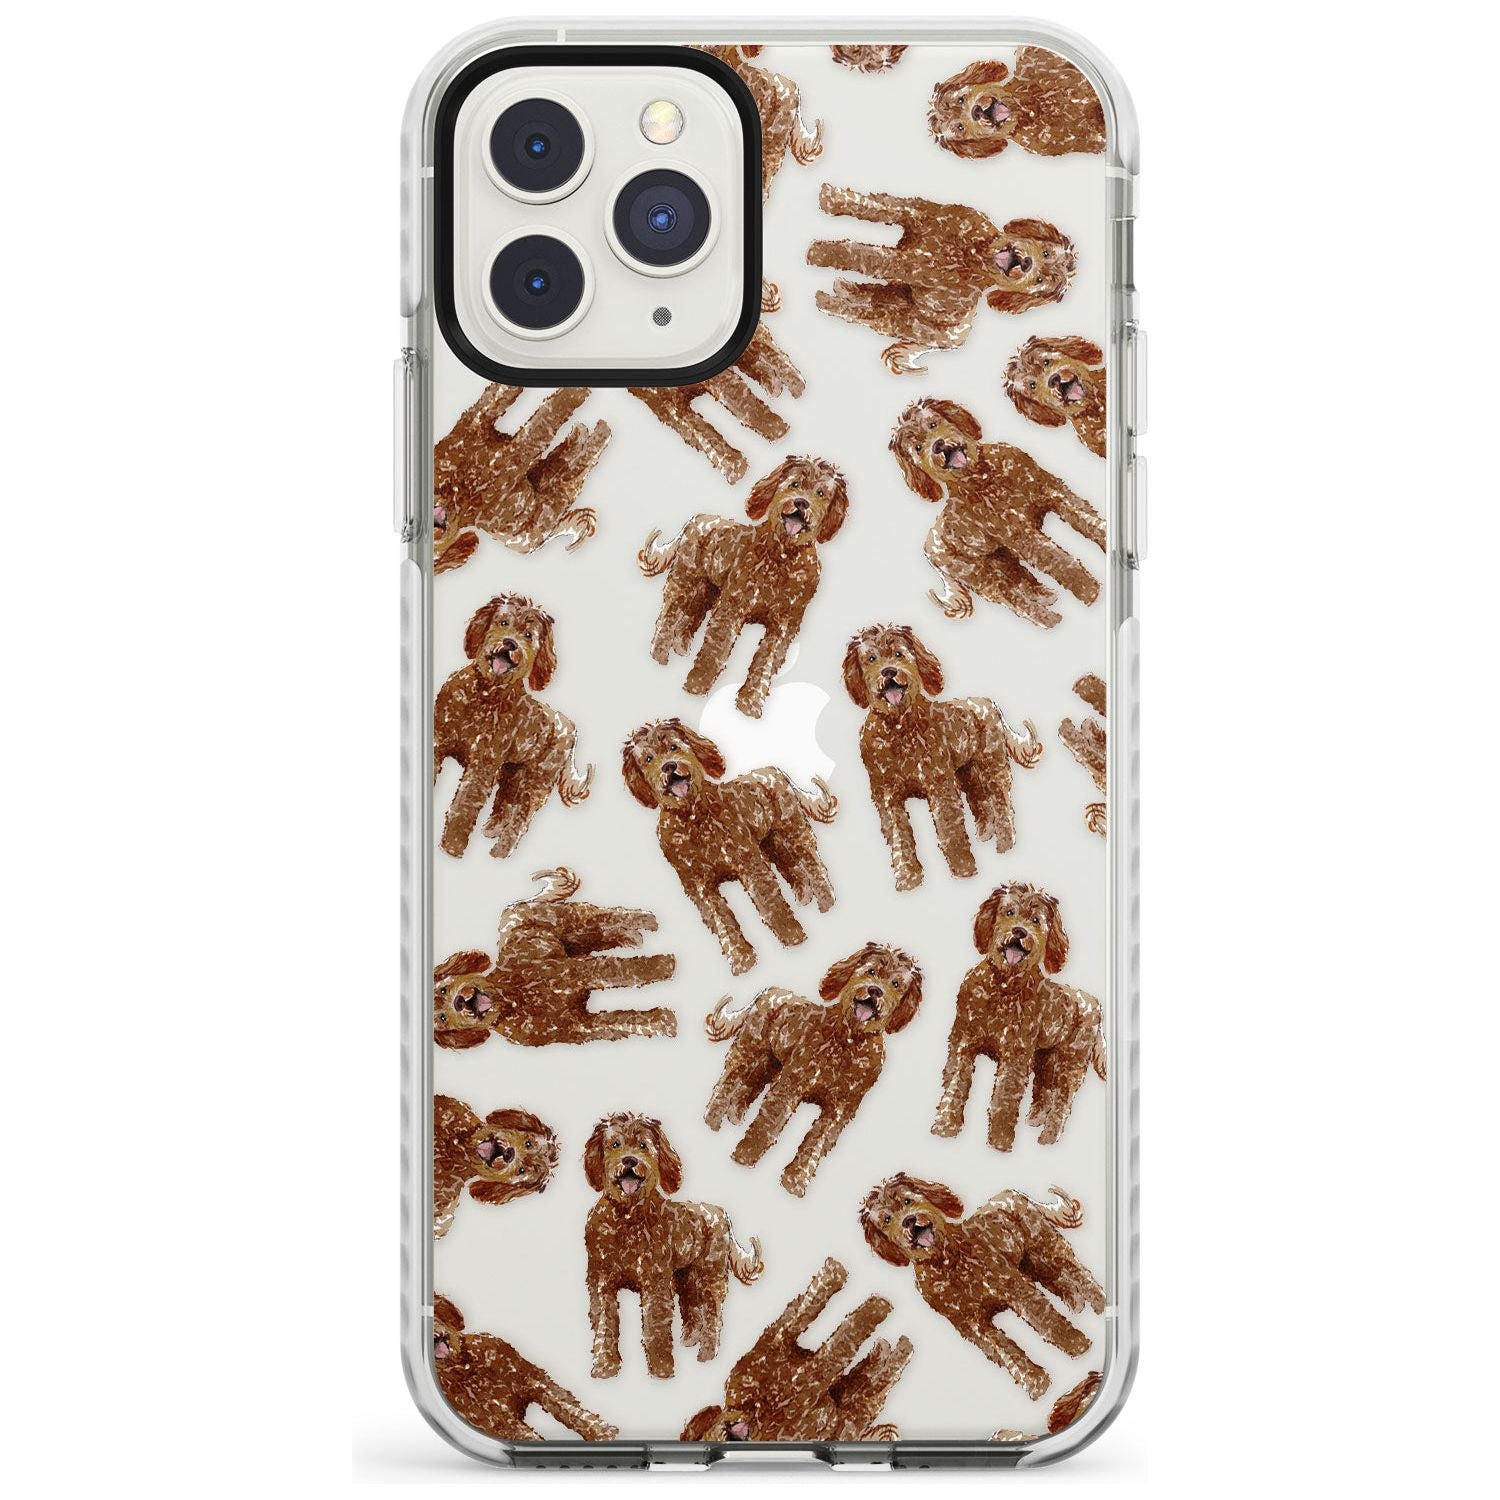 Labradoodle (Brown) Watercolour Dog Pattern Impact Phone Case for iPhone 11 Pro Max